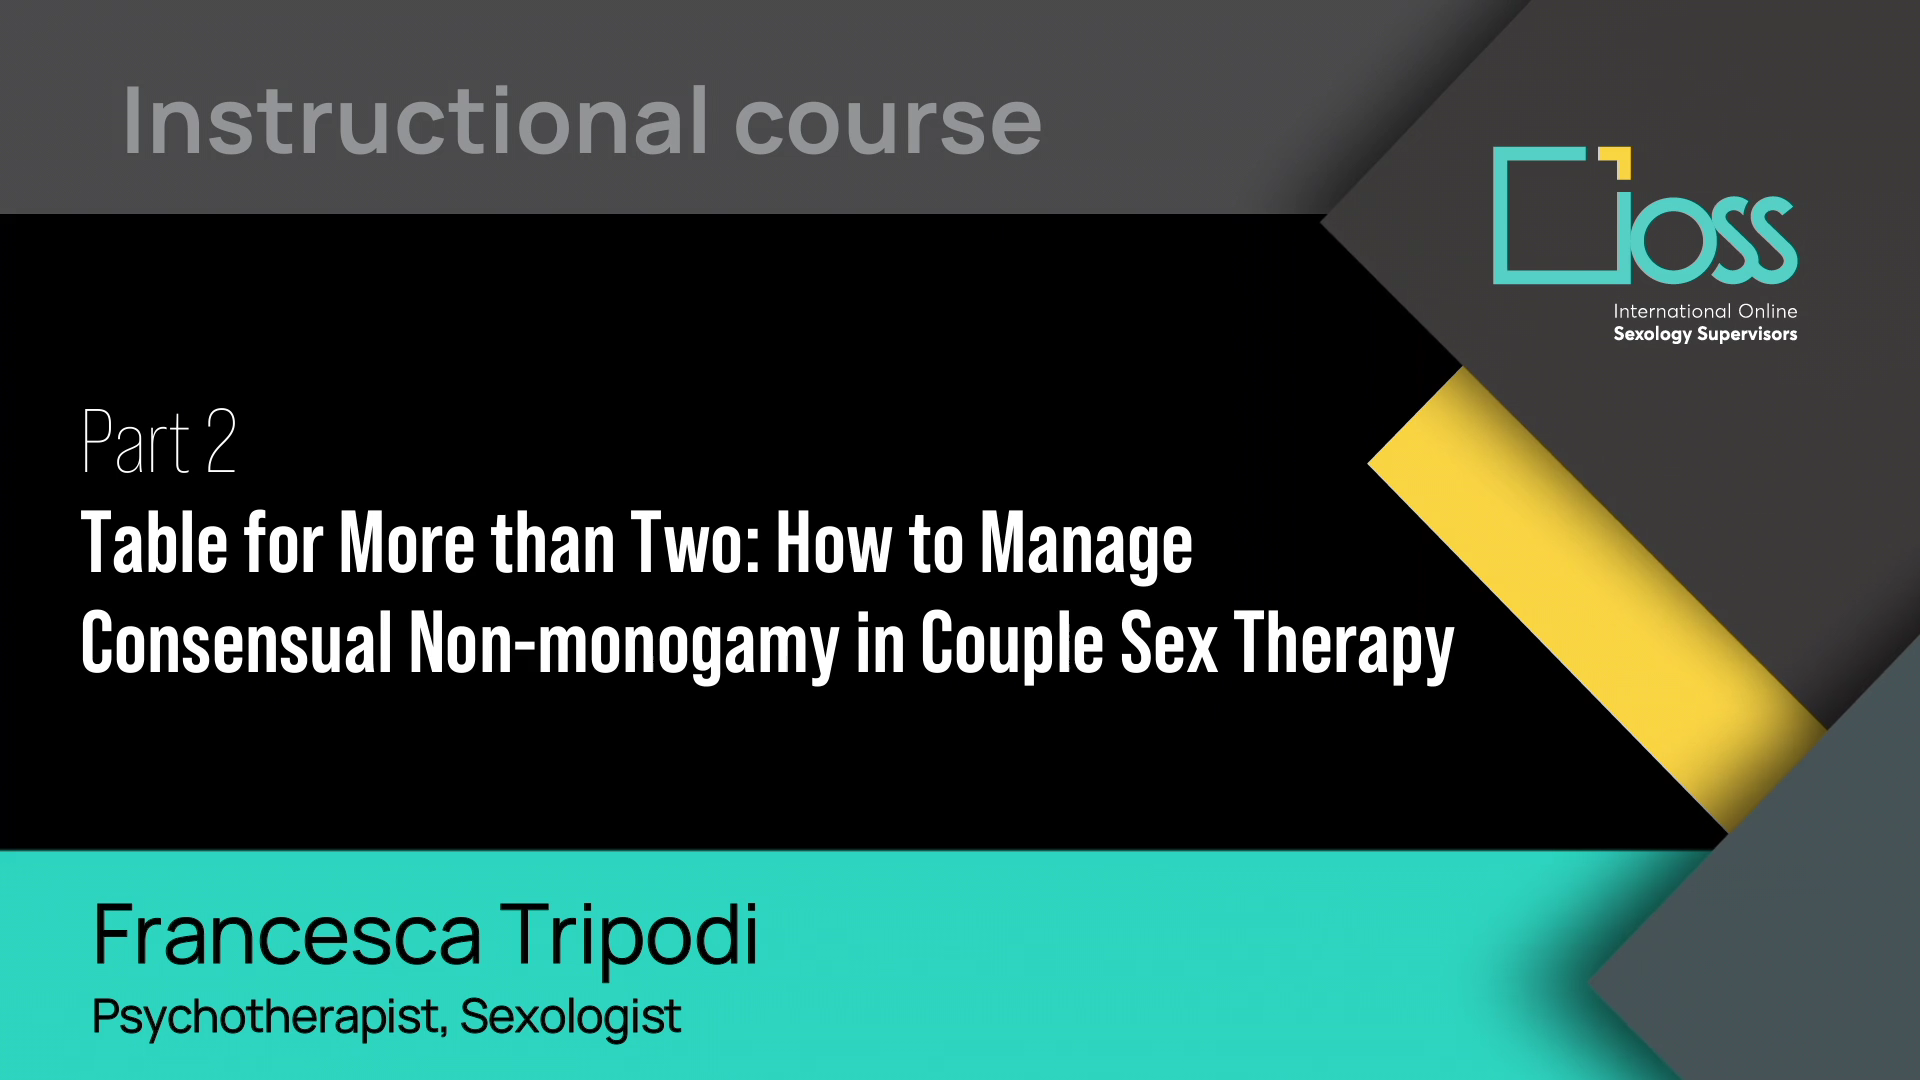 Part 2 Table for More than Two: How to Manage Consensual Non-monogamy in Couple Sex Therapy (Part 1 & 2)